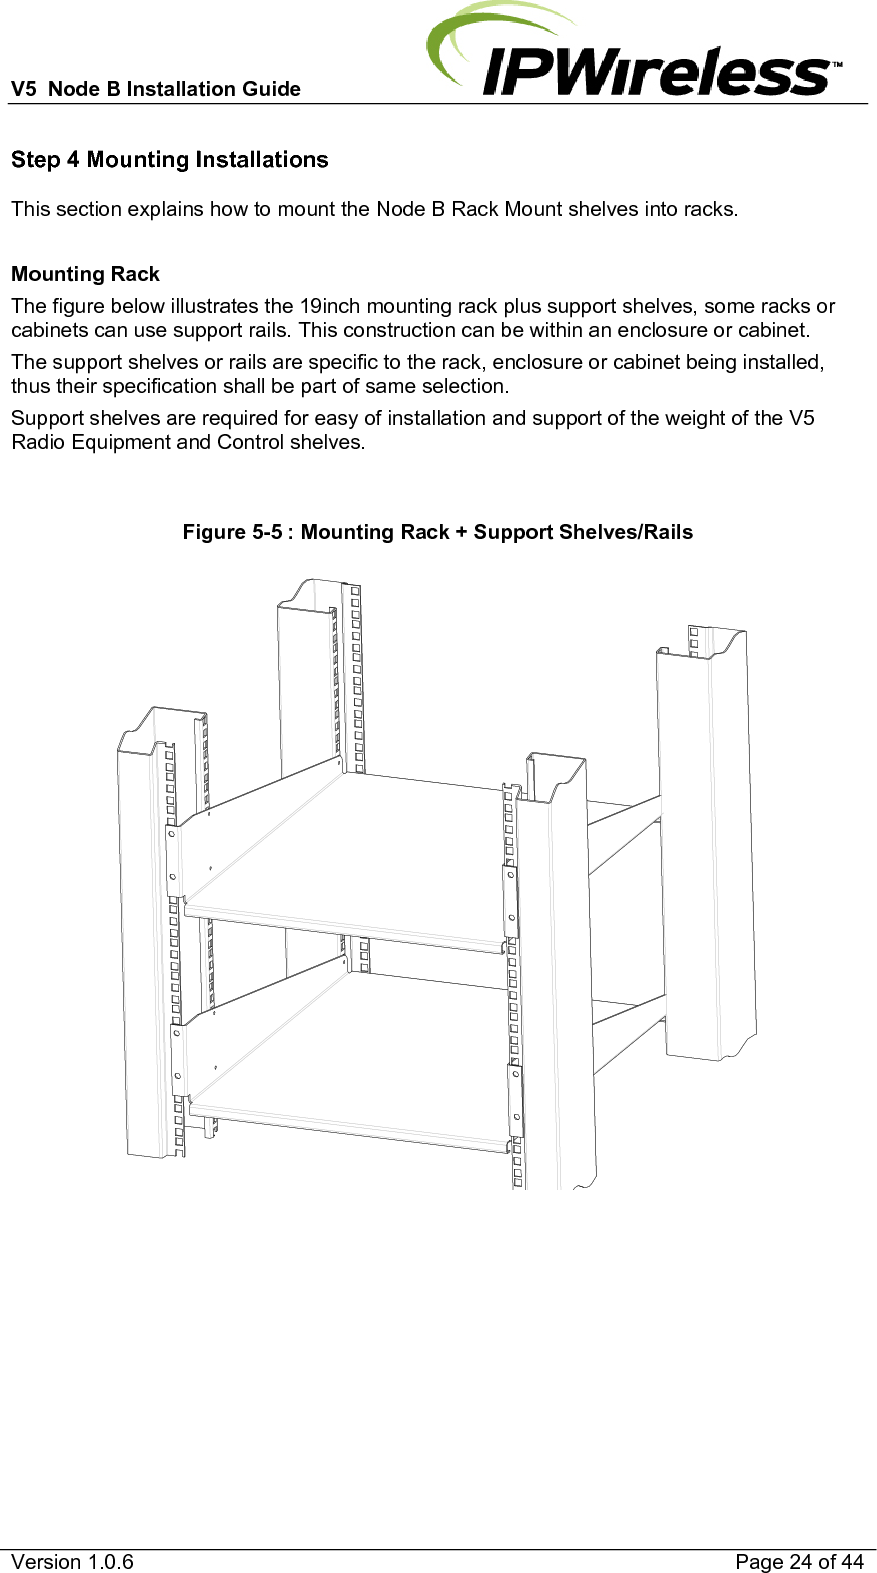 V5  Node B Installation Guide                           Version 1.0.6    Page 24 of 44 Step 4 Mounting Installations This section explains how to mount the Node B Rack Mount shelves into racks.  Mounting Rack The figure below illustrates the 19inch mounting rack plus support shelves, some racks or cabinets can use support rails. This construction can be within an enclosure or cabinet. The support shelves or rails are specific to the rack, enclosure or cabinet being installed, thus their specification shall be part of same selection. Support shelves are required for easy of installation and support of the weight of the V5 Radio Equipment and Control shelves.  Figure 5-5 : Mounting Rack + Support Shelves/Rails      